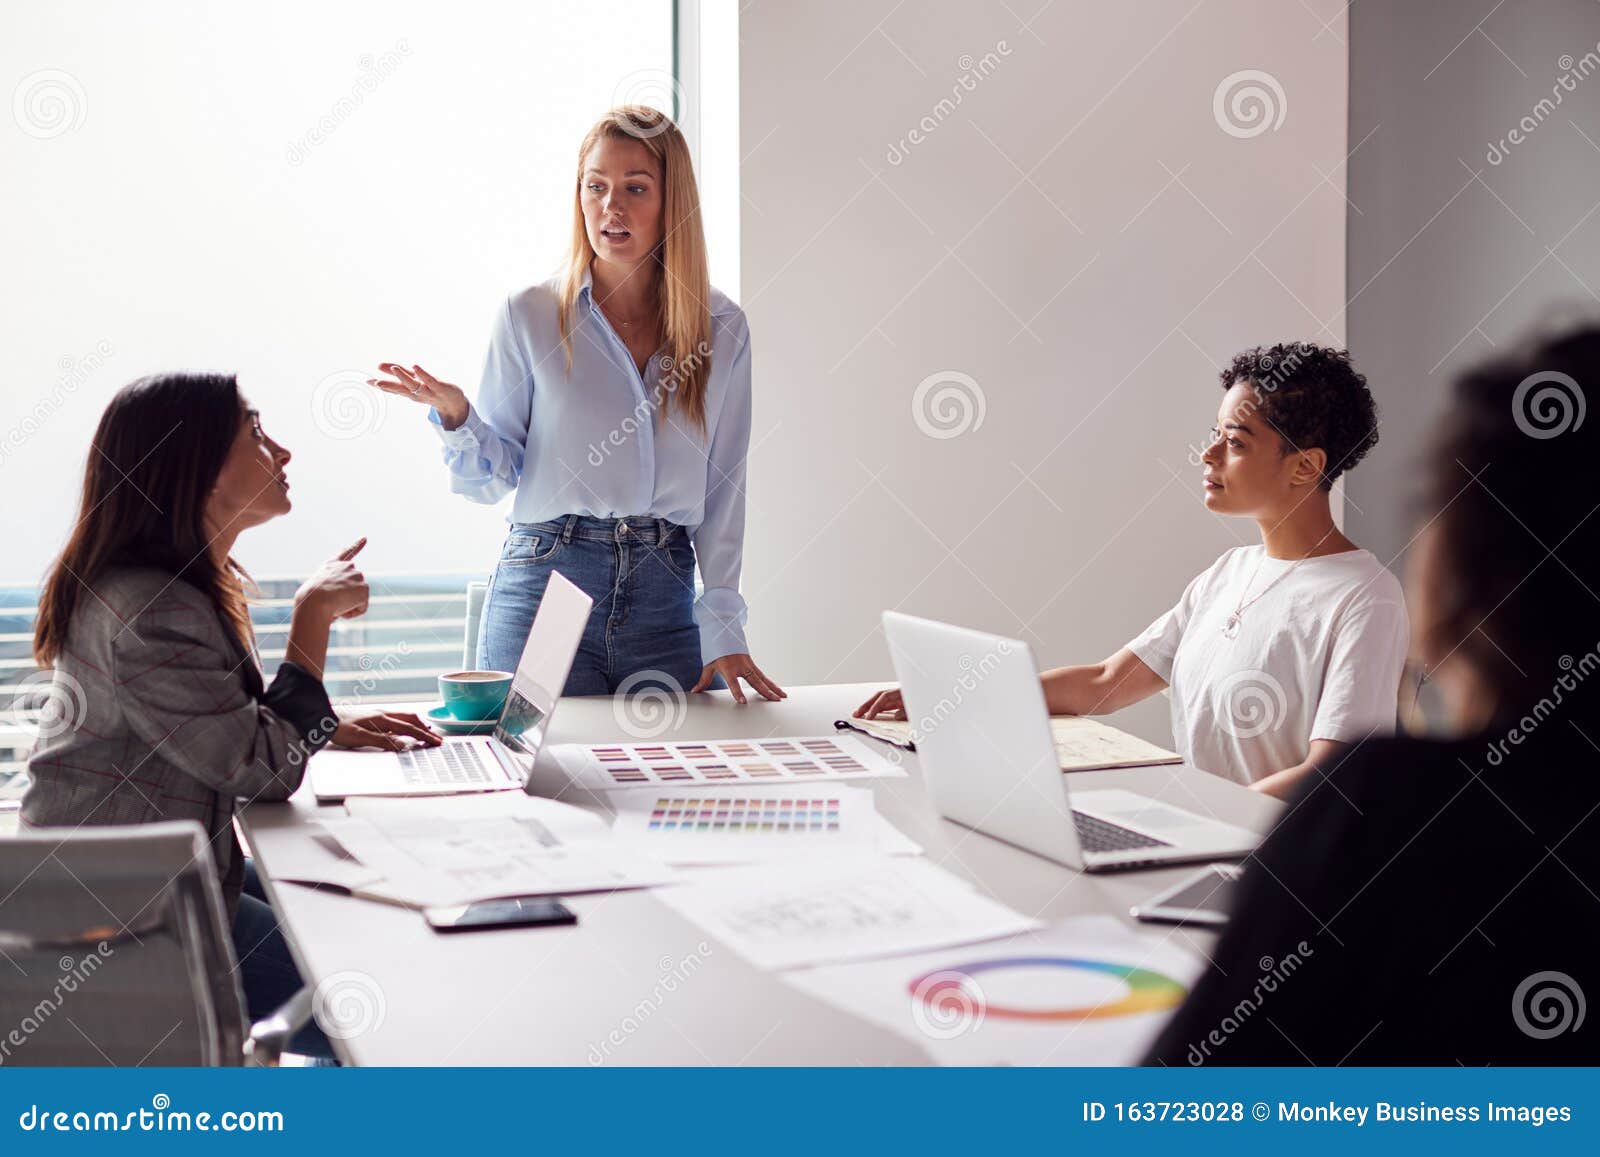 499 Multicultural Women Empowerment Stock Photos - Free & Royalty